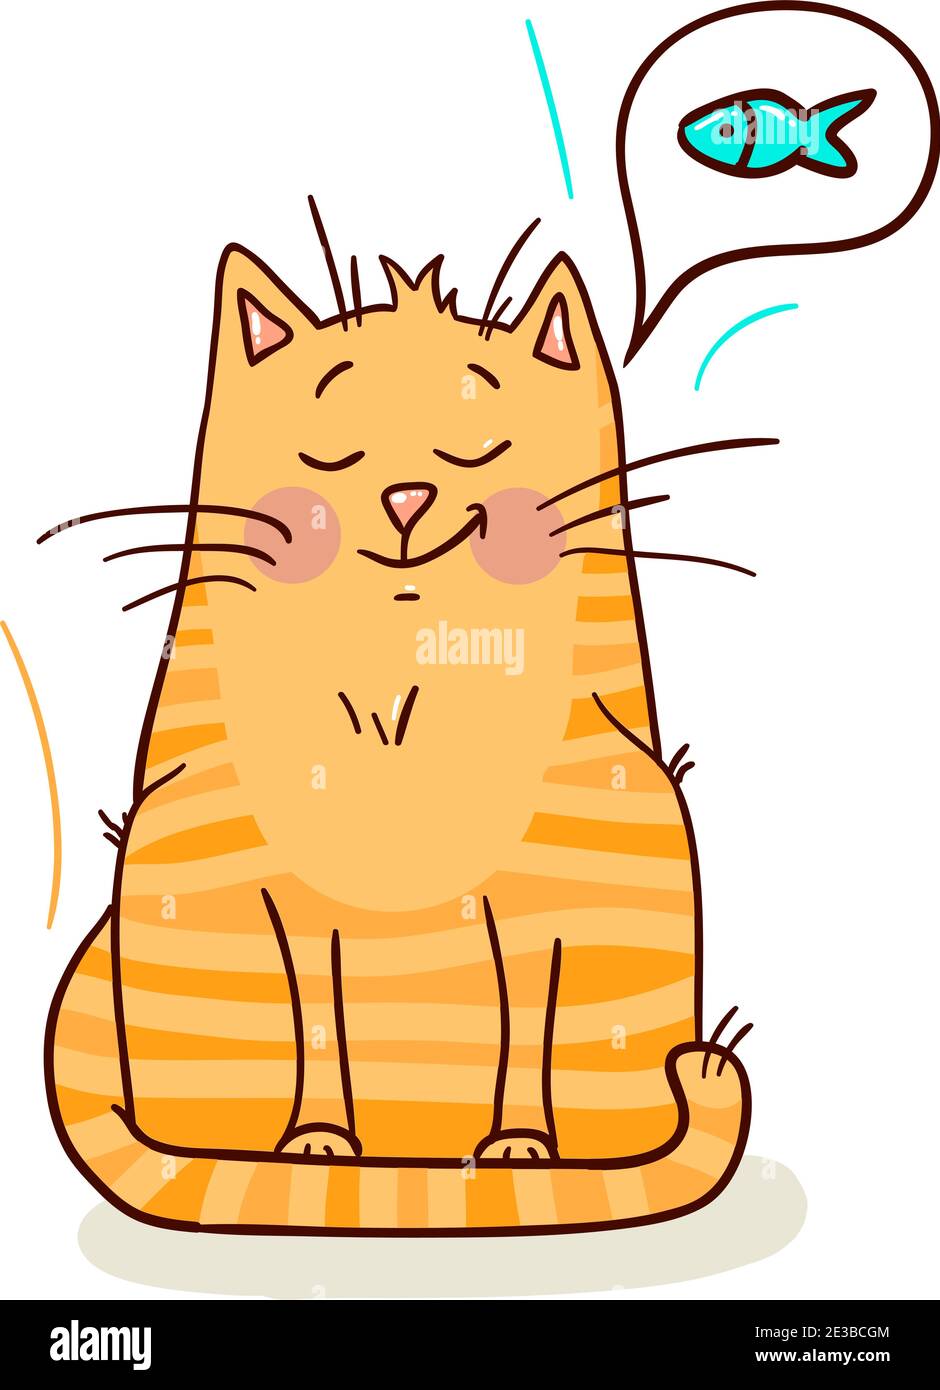 The cat is sleeping and dreams of a fish. Stock Vector